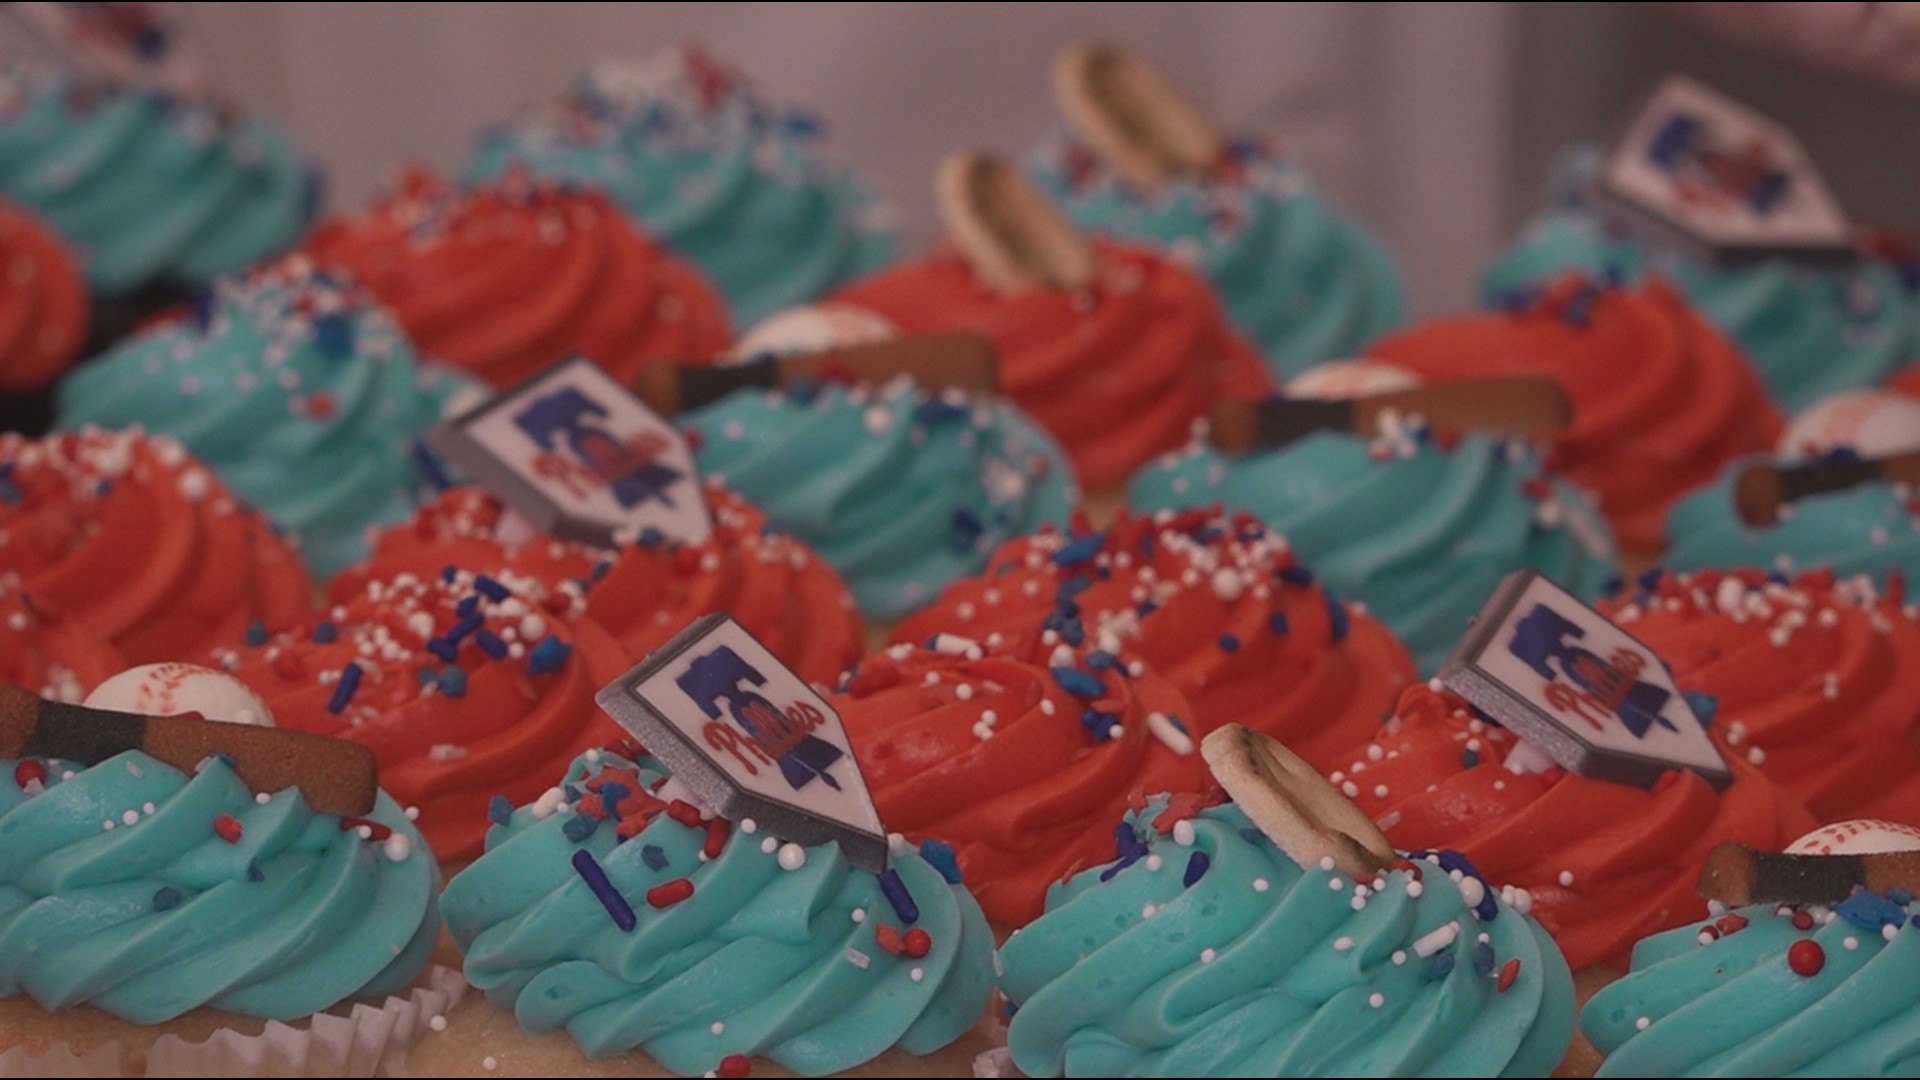 From cupcakes to beer, businesses are having fun celebrating the Phillies' World Series run.